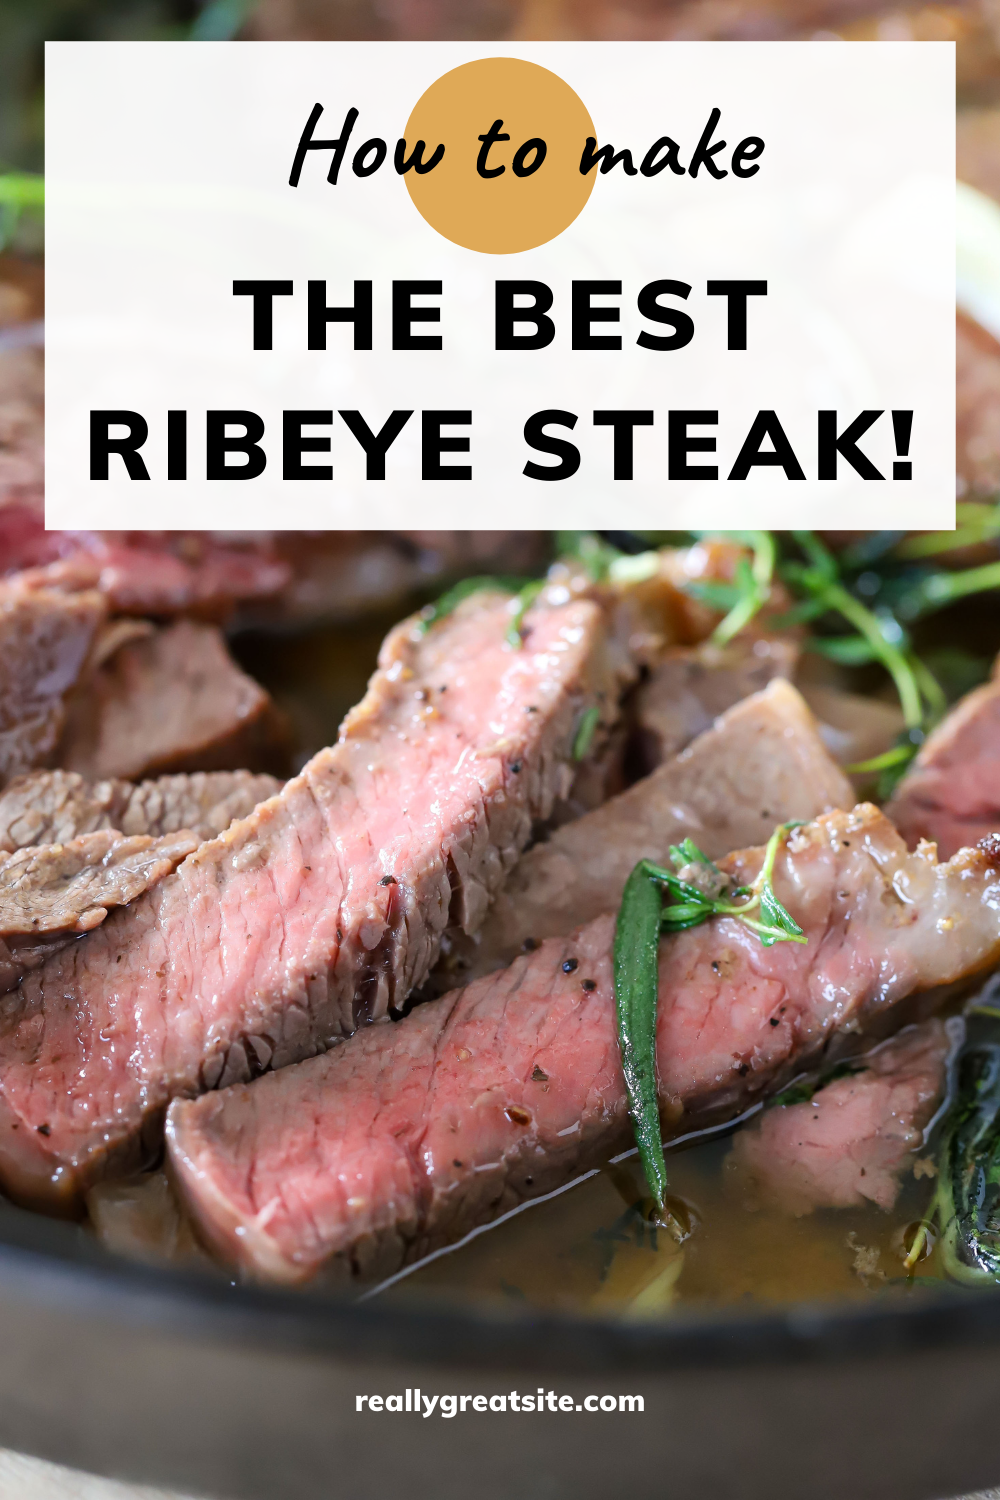 I'm going to show you my favorite way to make an incredibly flavorful Ribeye Steak! You will love this easy way to make an easy but delicious steak that tastes like you got it from a restaurant. #ribeye #steak #dinner #easy #delicious #healthydinner via @jennikolaus